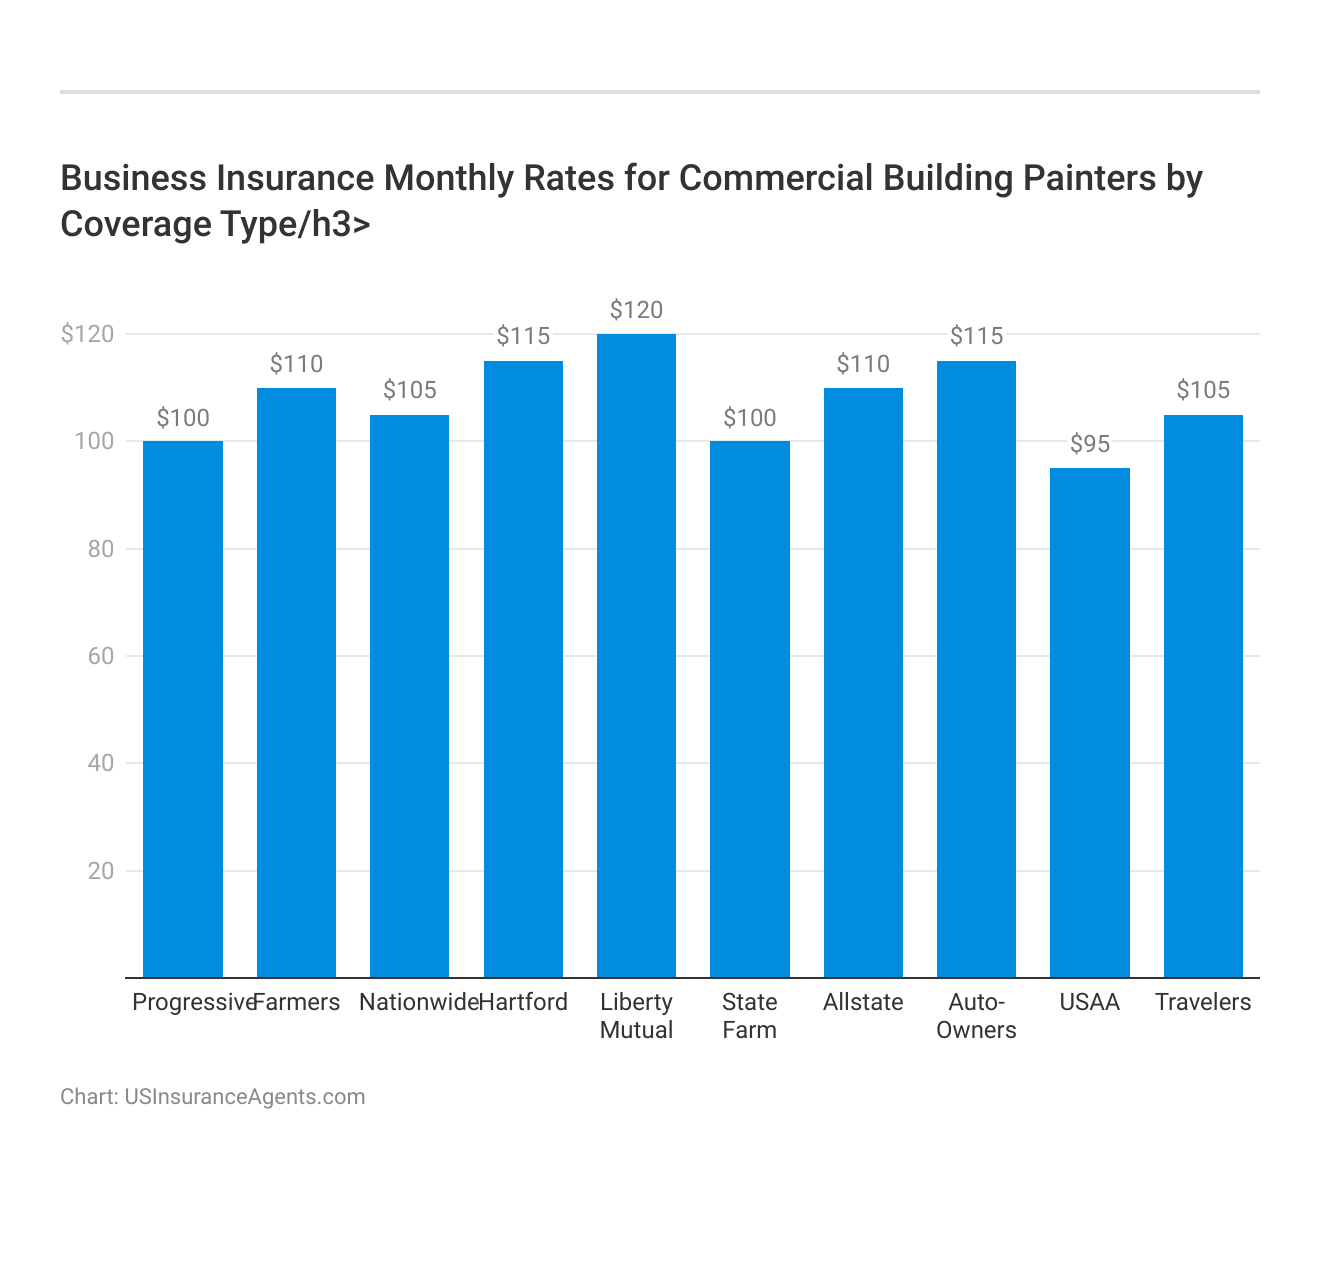 <h3>Business Insurance Monthly Rates for Commercial Building Painters by Coverage Type</h3>